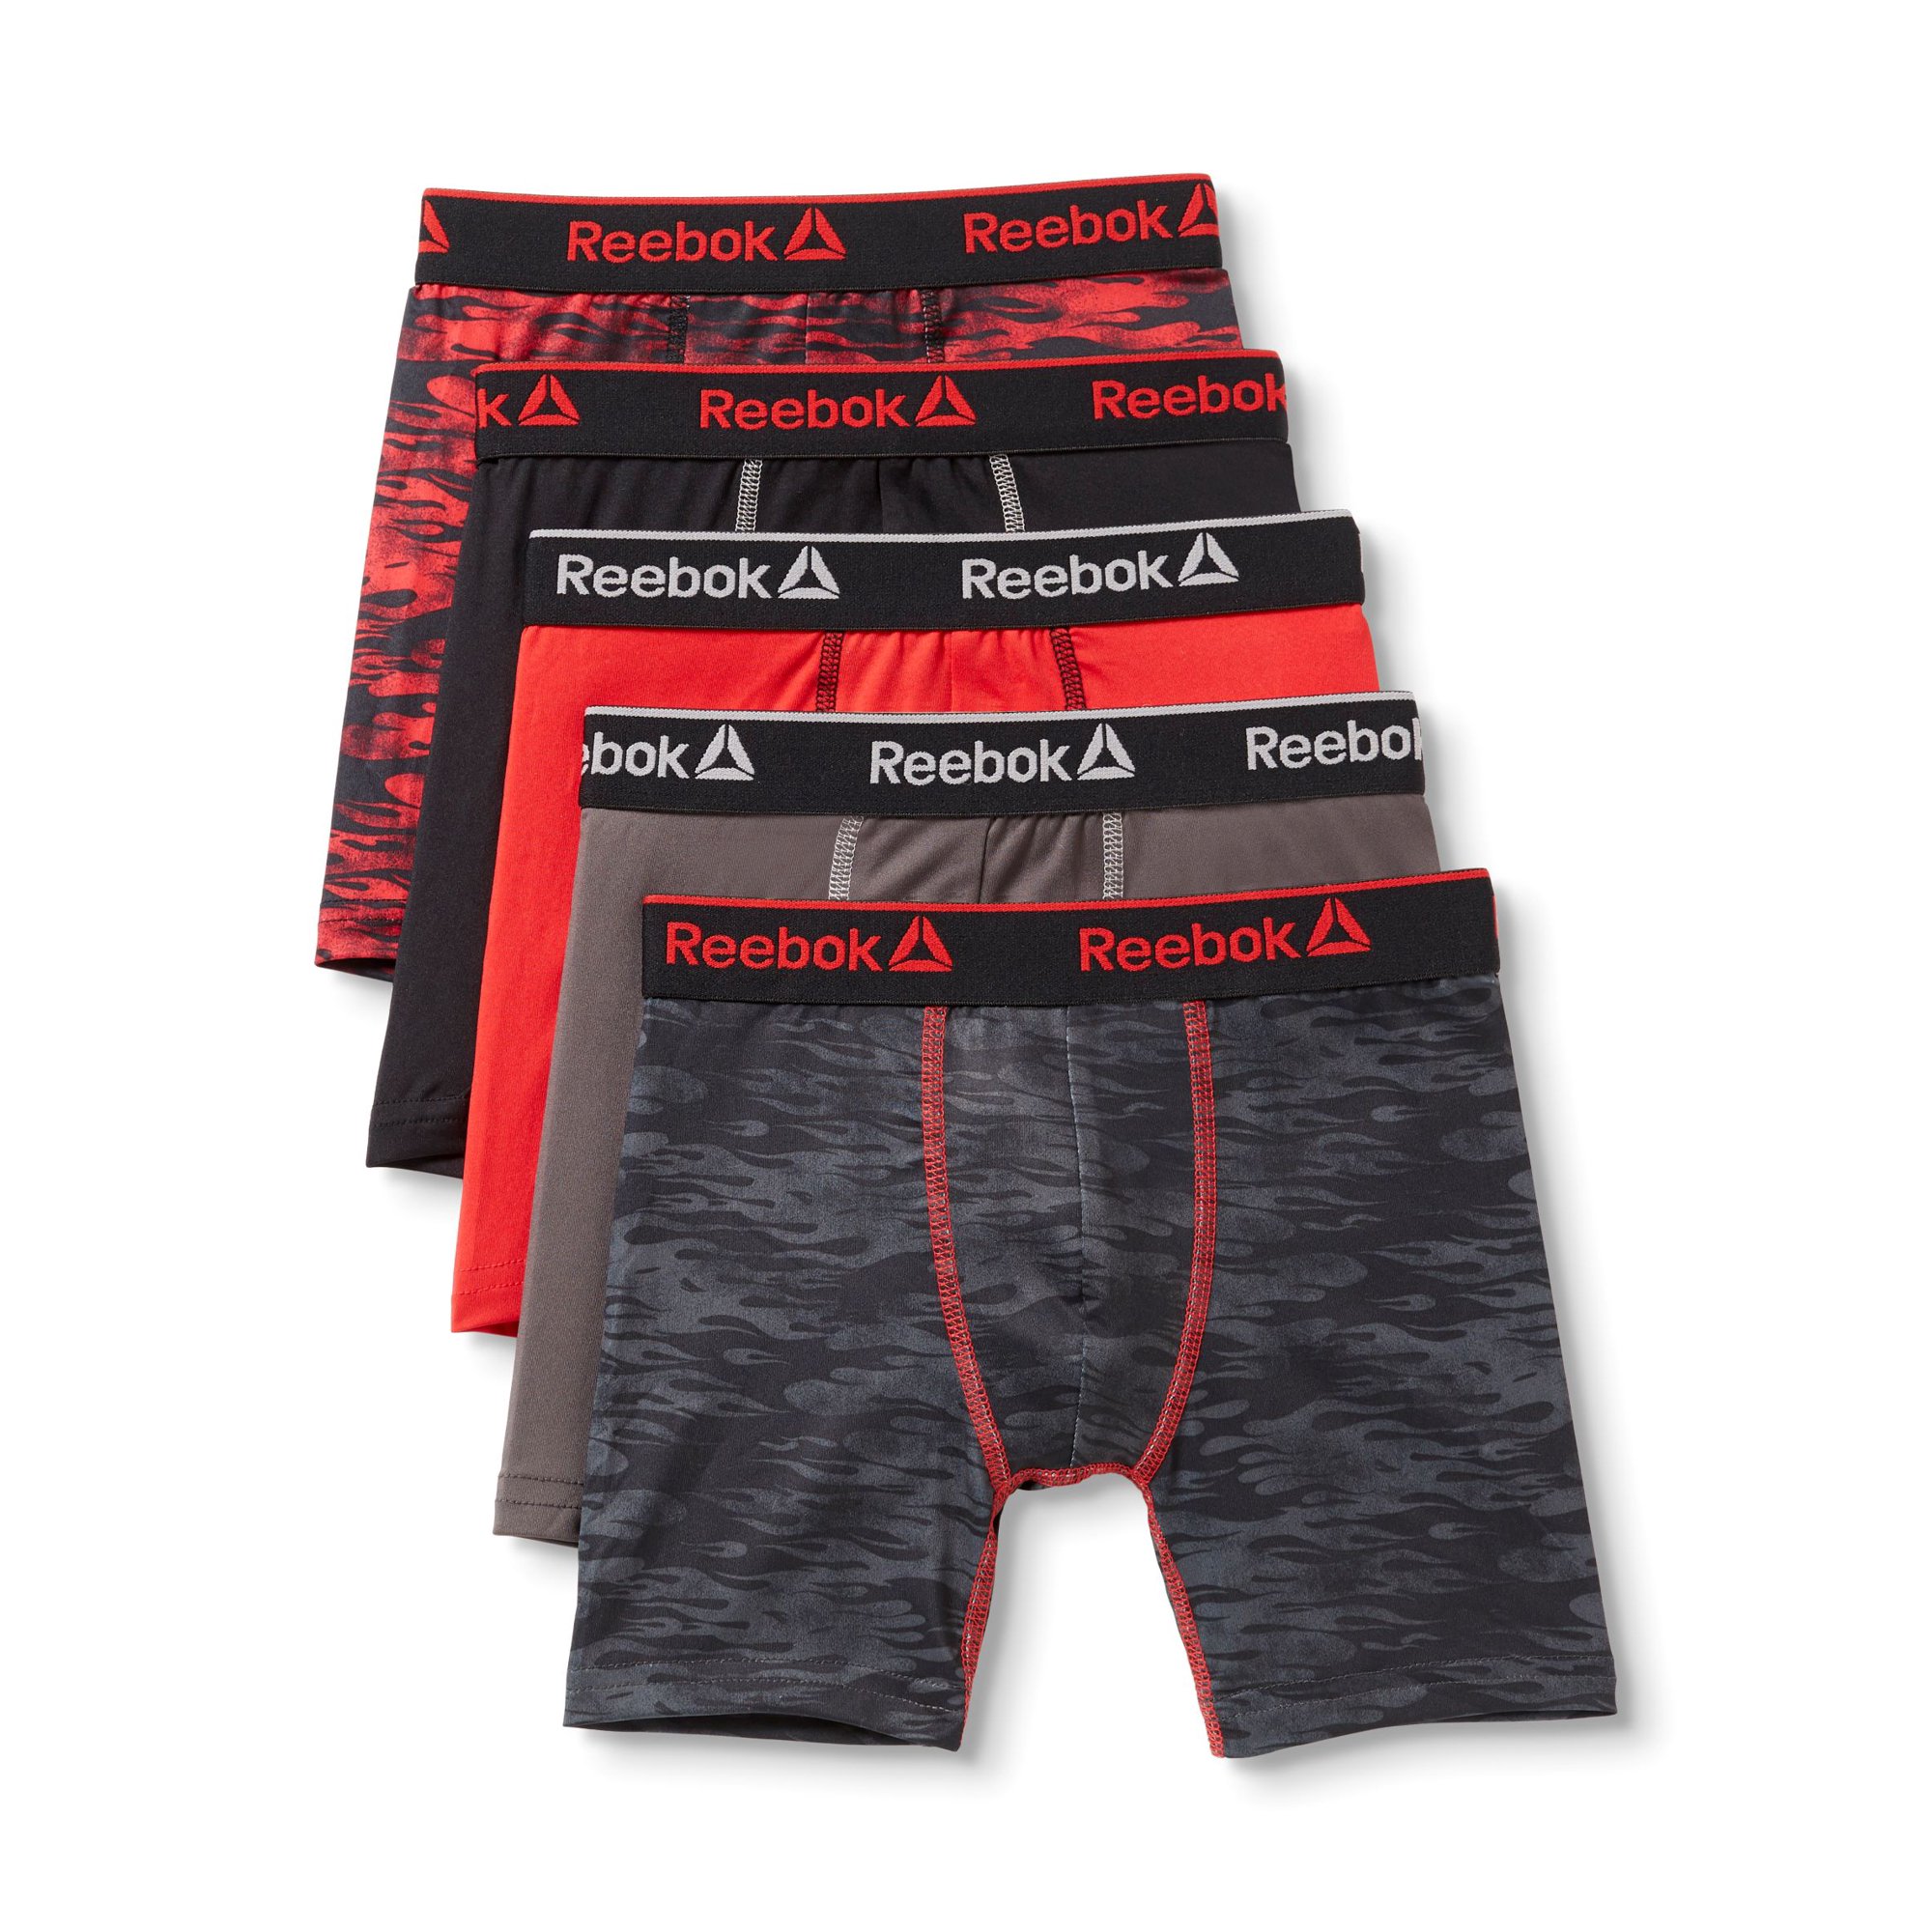 Reebok Boys' Performance Boxer Briefs, 5 Pack, Sizes S-XL - image 1 of 6